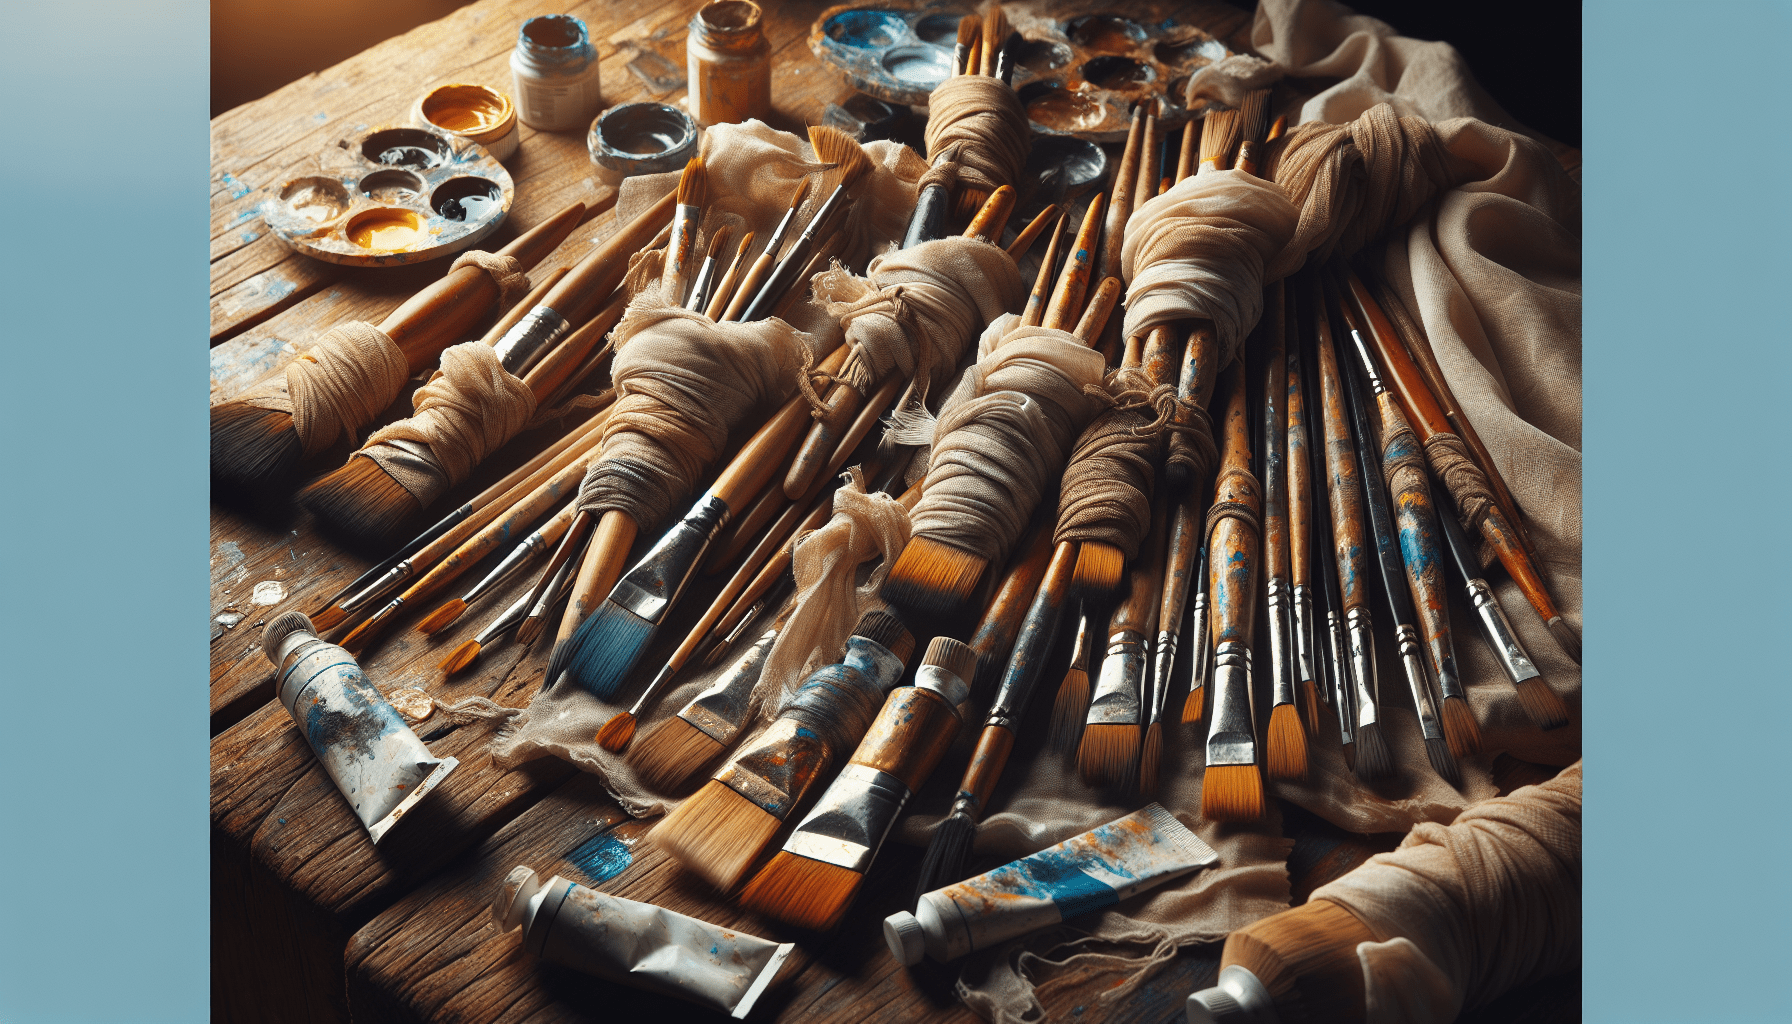 How To Store Paint Brushes Between Painting Sessions